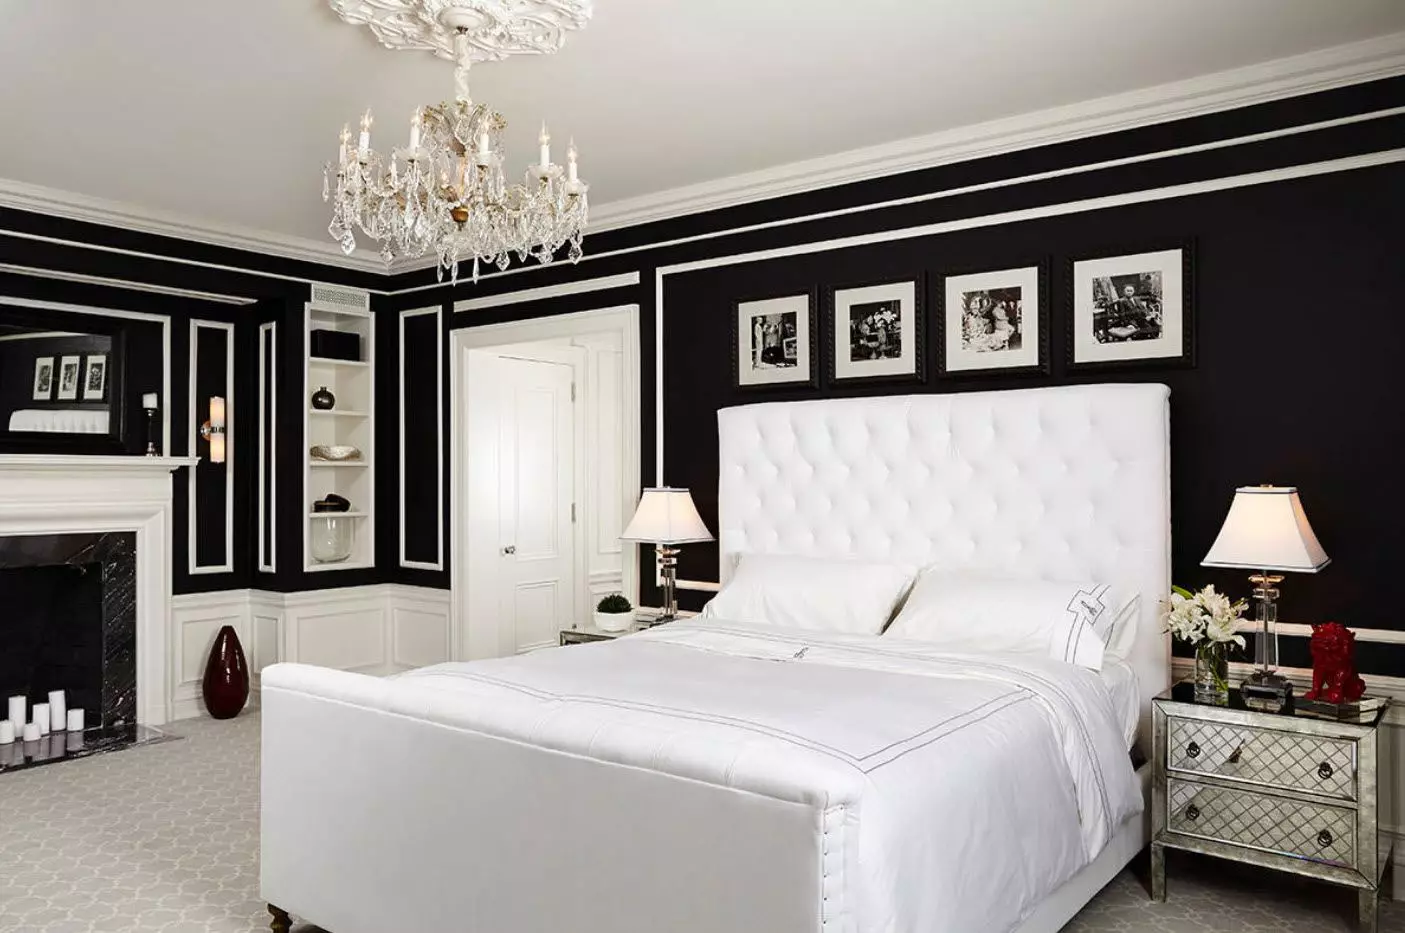 Black and white bedroom (76 photos): design and interior styles in black and white tones. What color can curtains and wallpapers? 9878_16